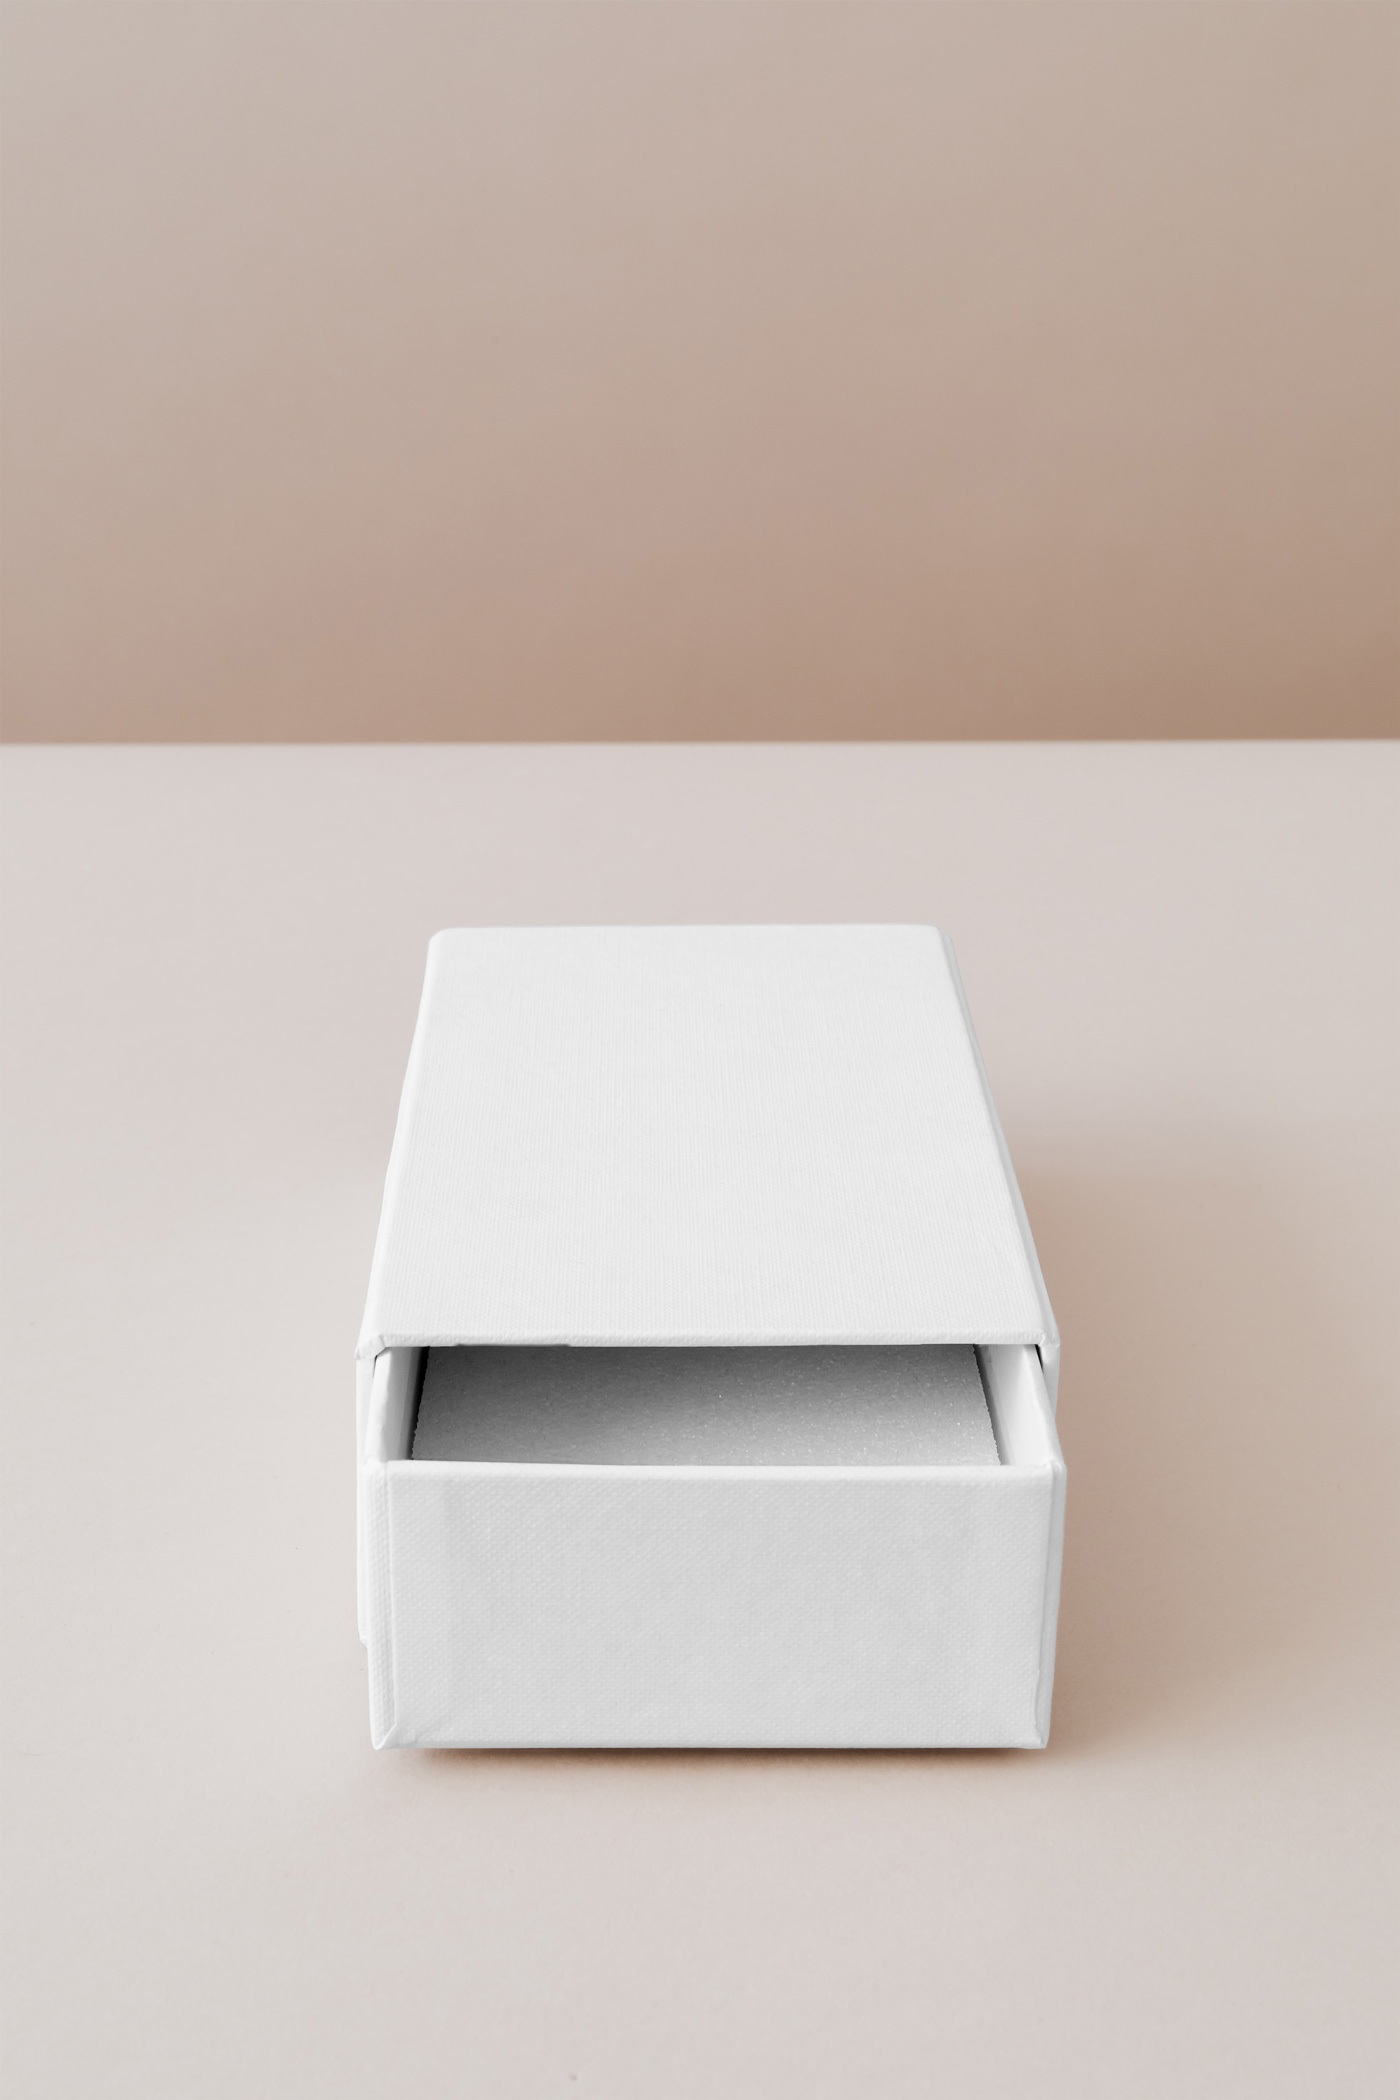 Front View of Open Box Mockup FREE PSD